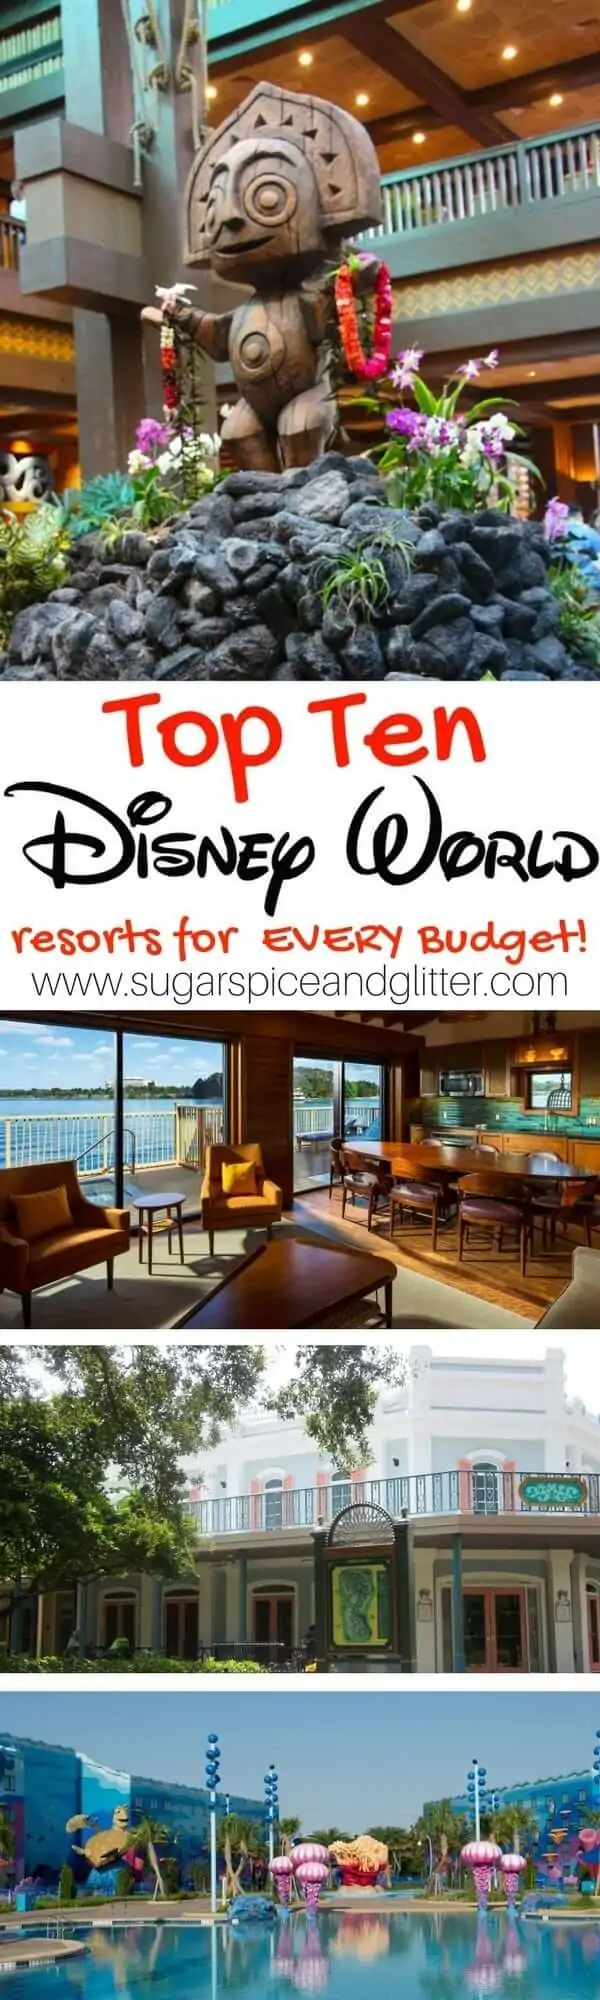 The Top Ten Walt Disney World Resorts for every budget - luxurious deluxe resorts and value-packed Value resorts that guarantee you an amazing Disney family vacation